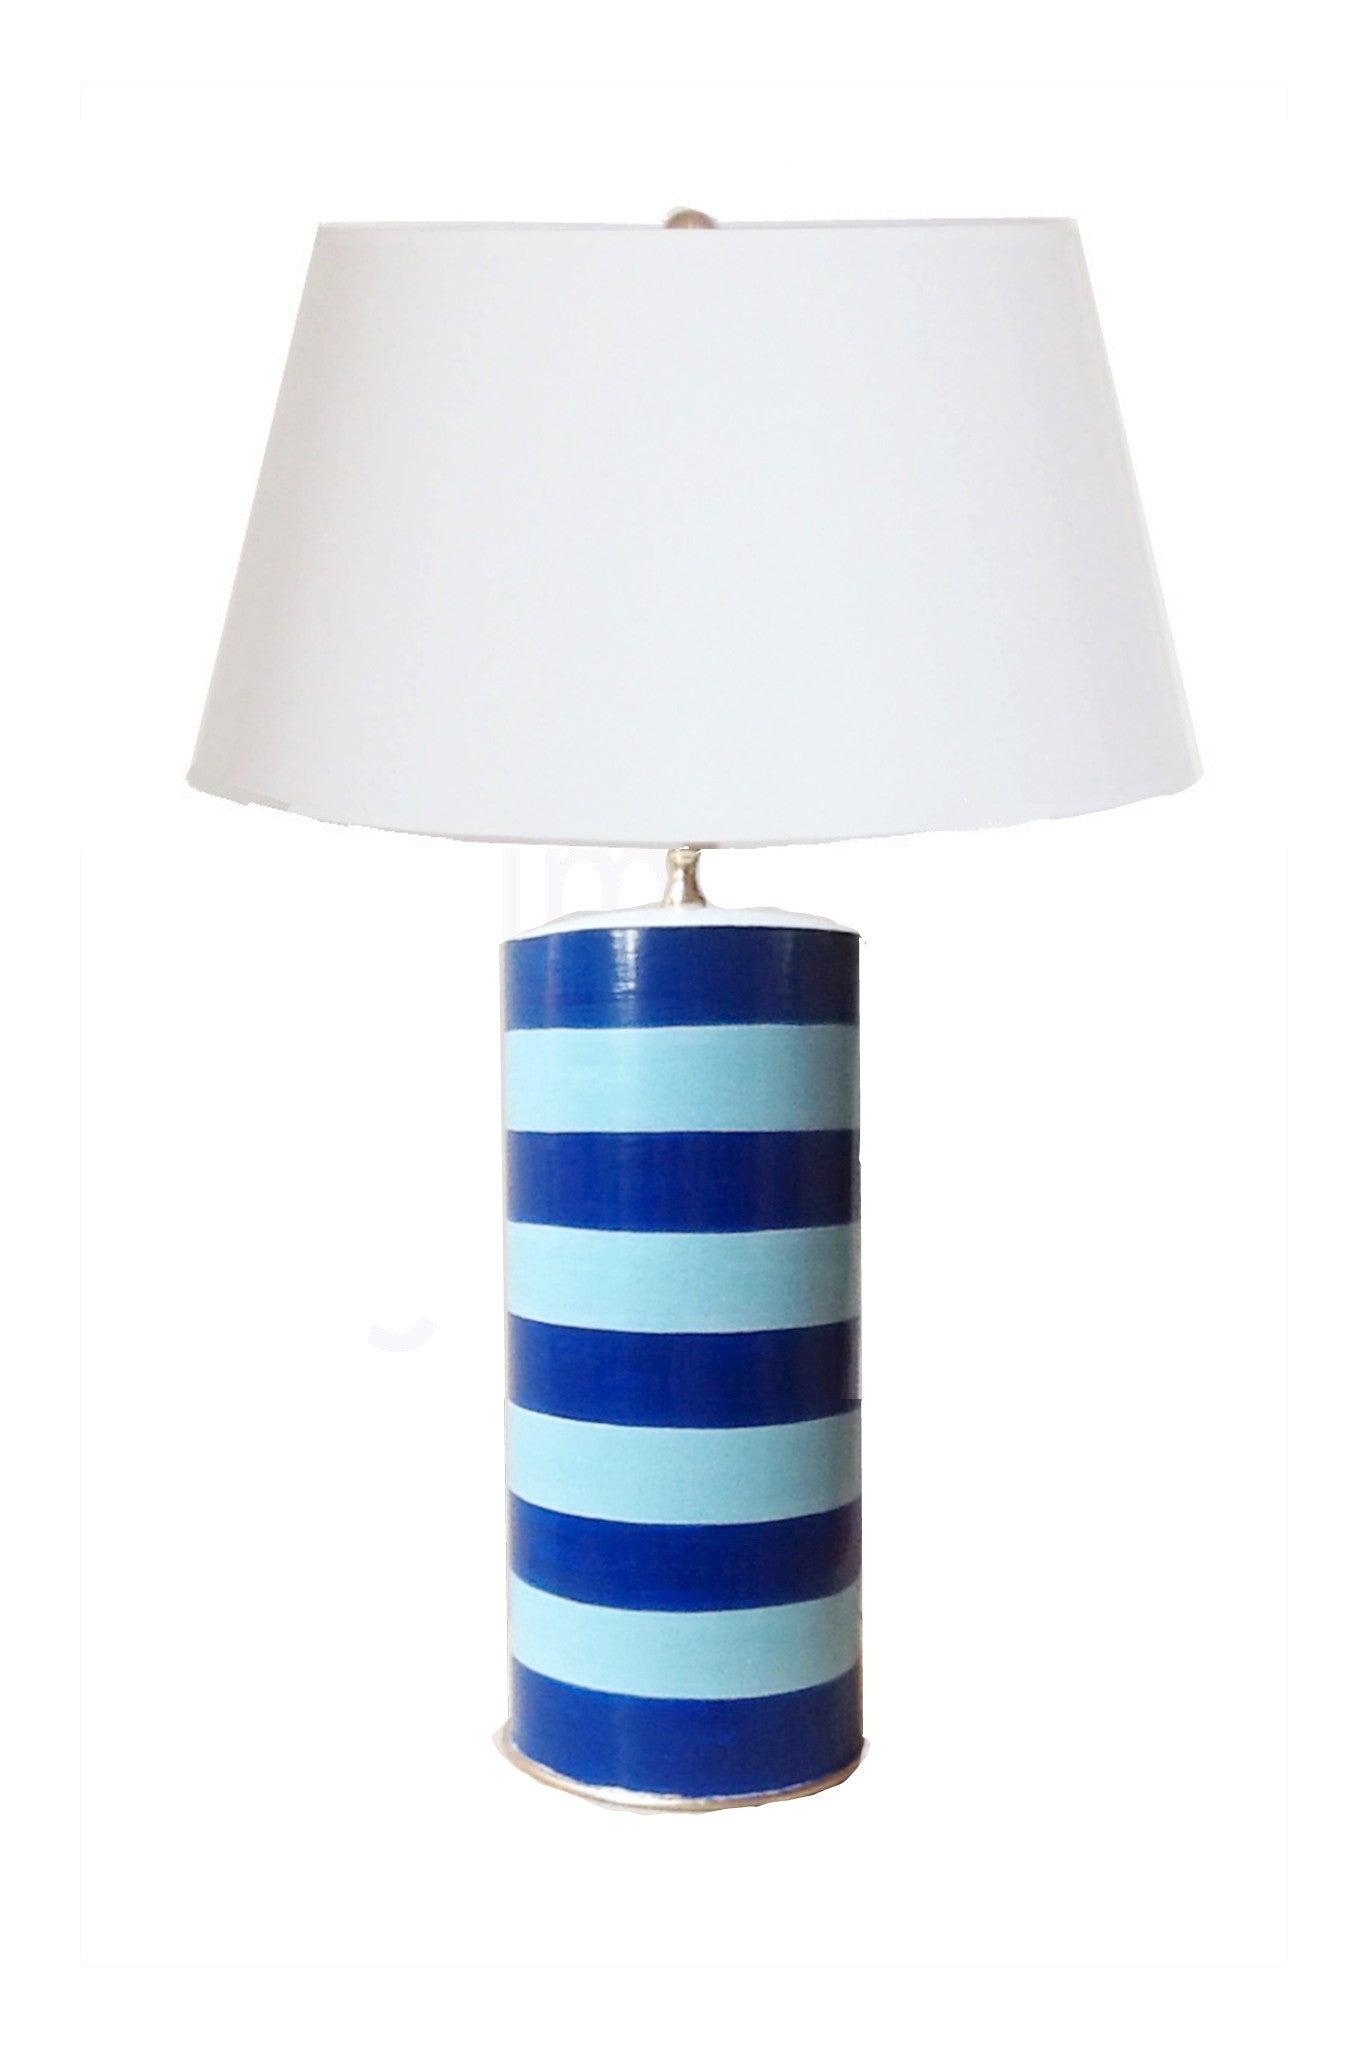 Stacked Lamp in Turquoise Blue